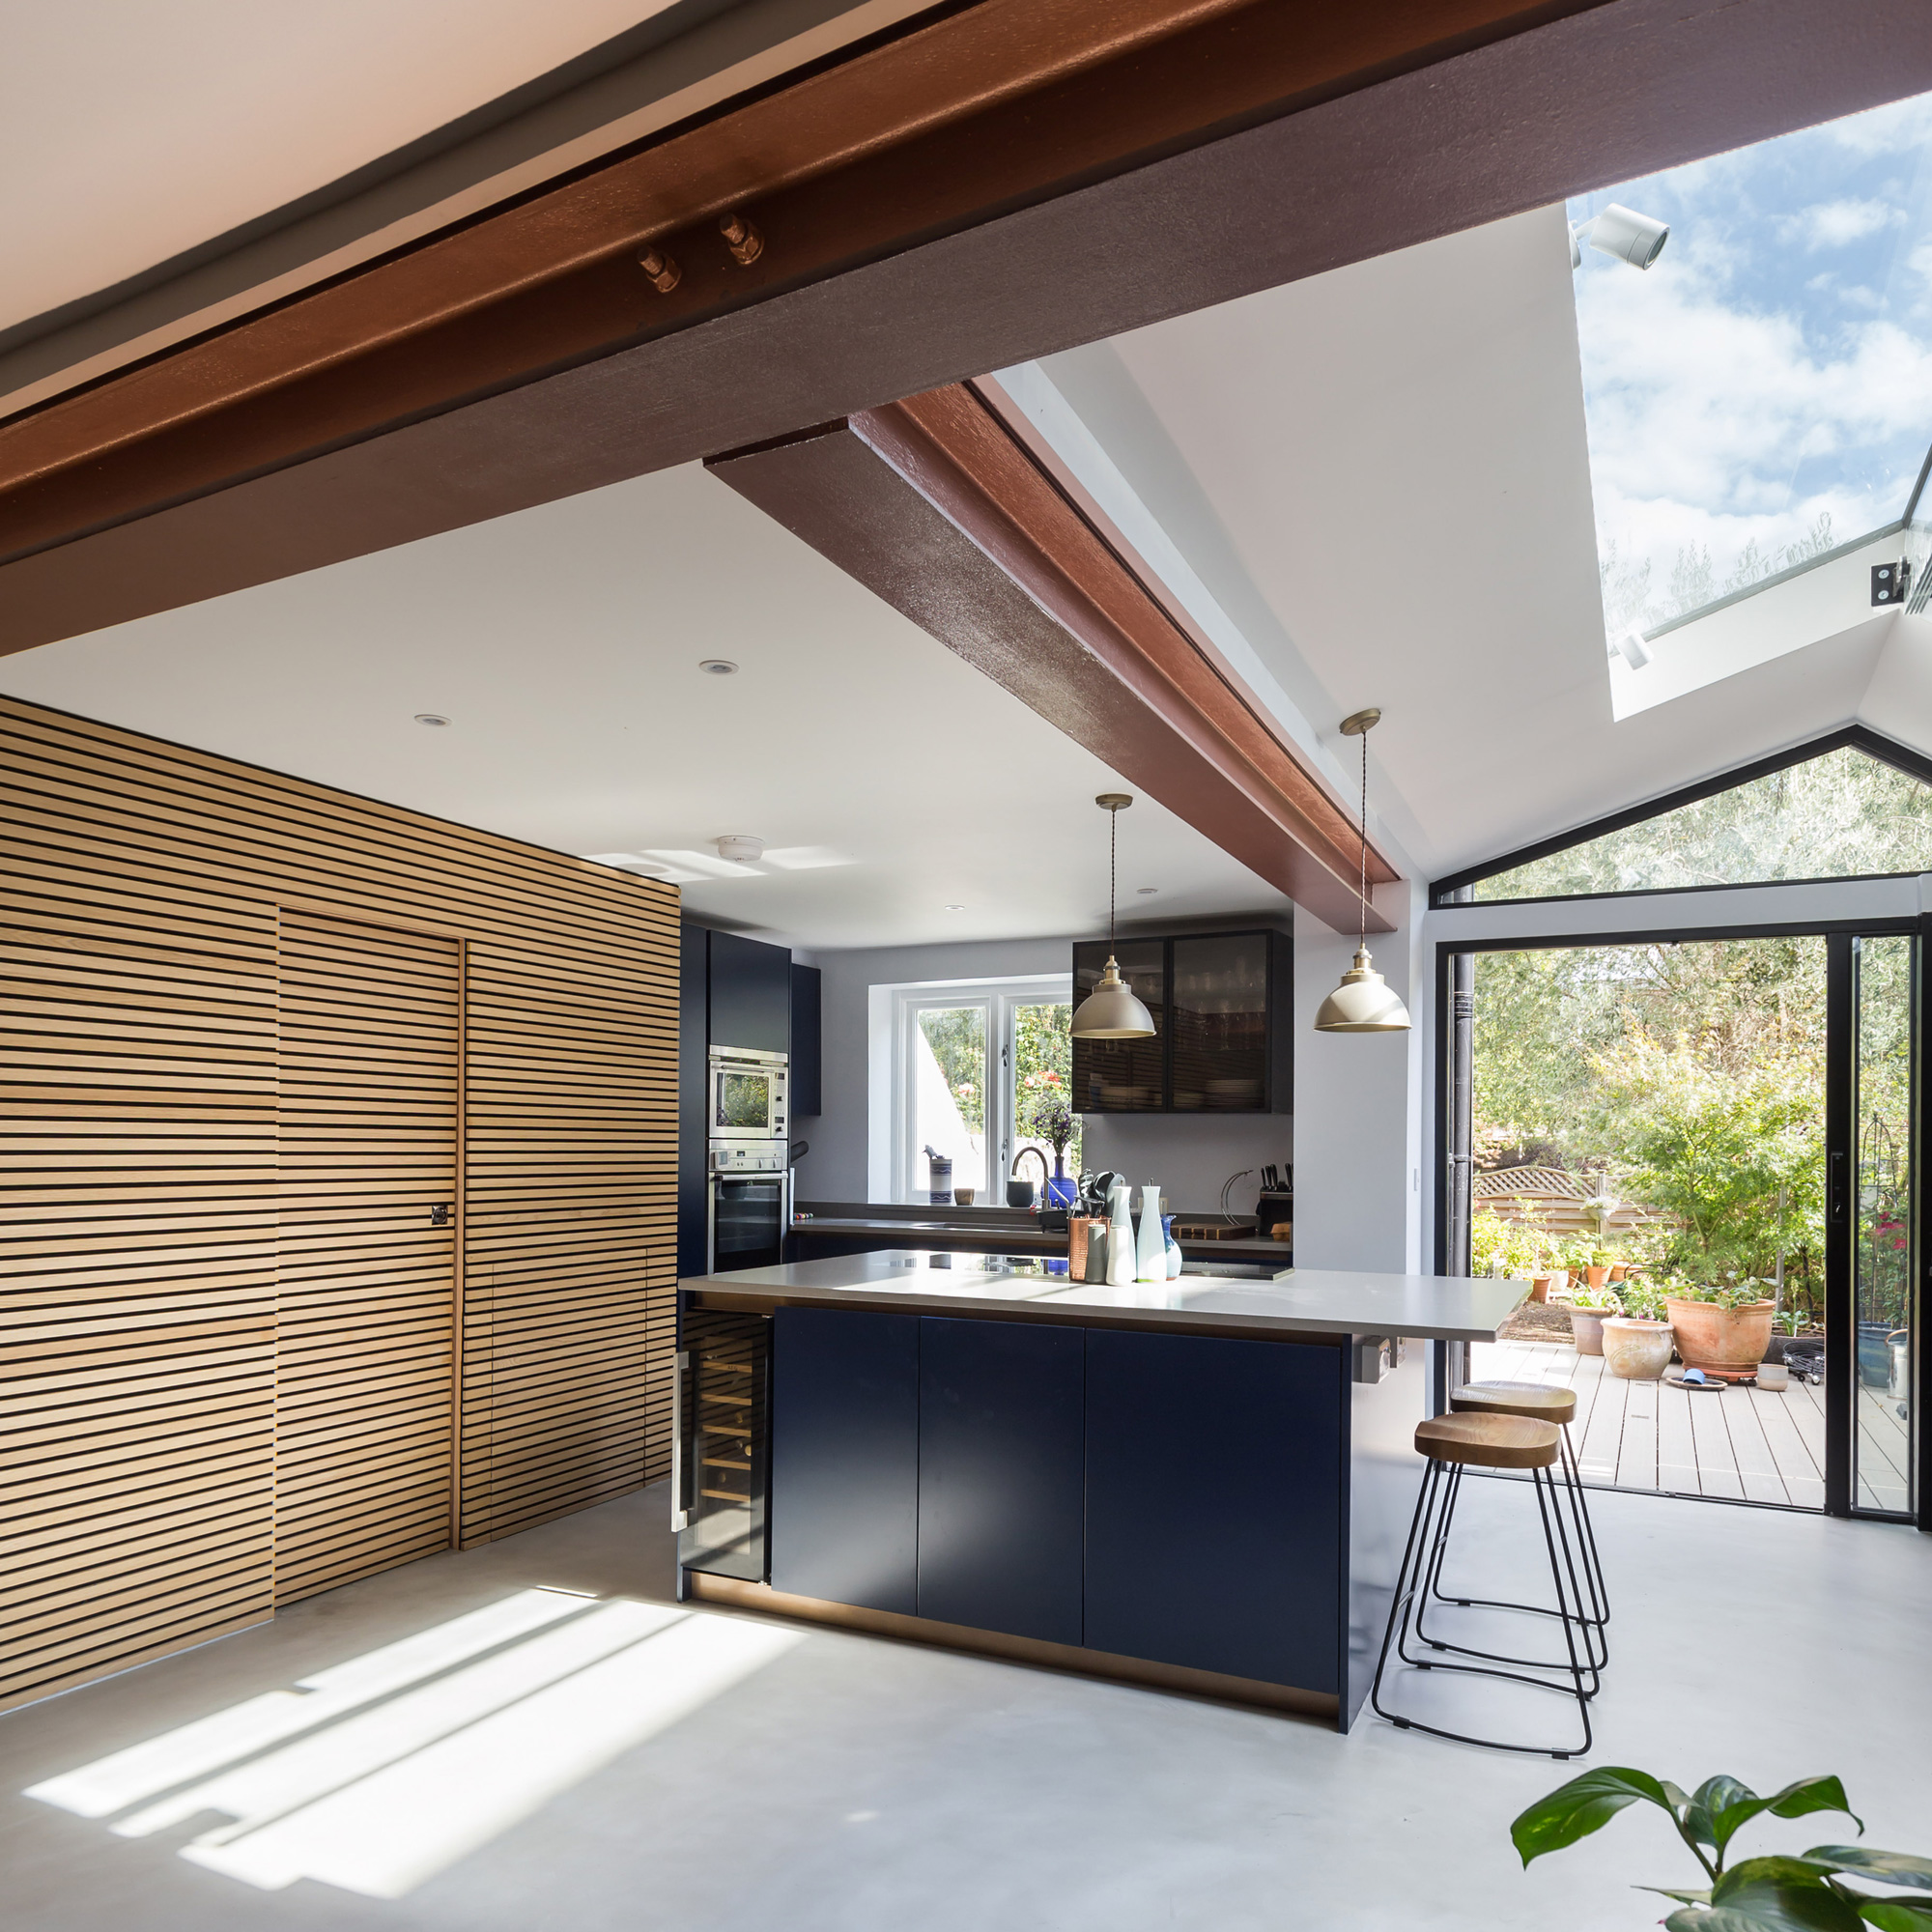 a kitchen with a long rooflight, sliding patio doors, navy blue kitchen cabinetry. plenty of storage and a kitchen island